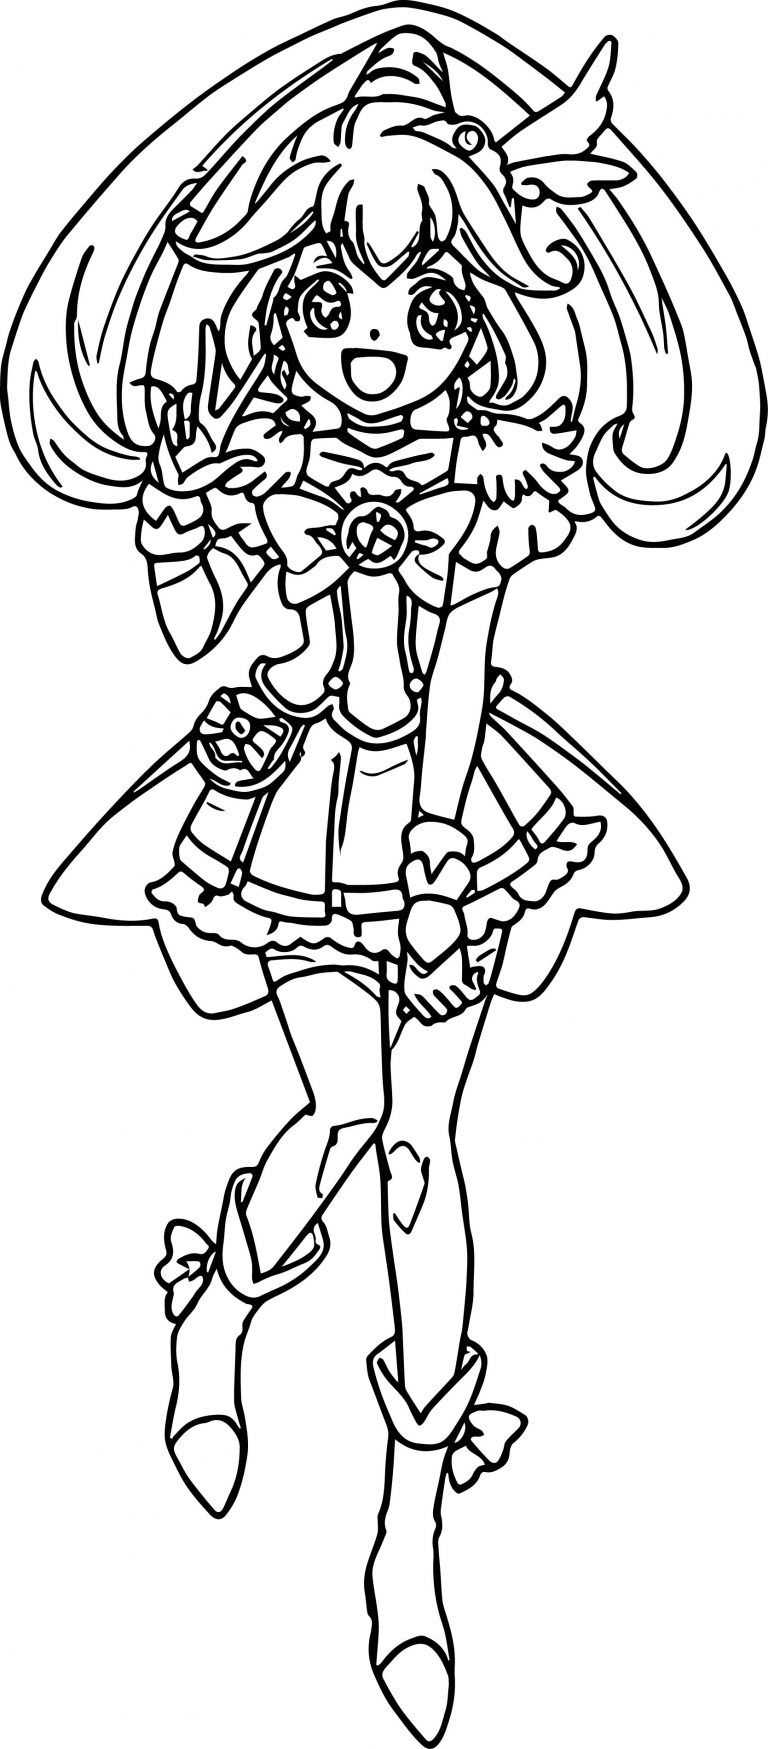 Happy Glitter Force Coloring Page | Wecoloringpage.com | Glitter force, Coloring  pages, Glitter force candy